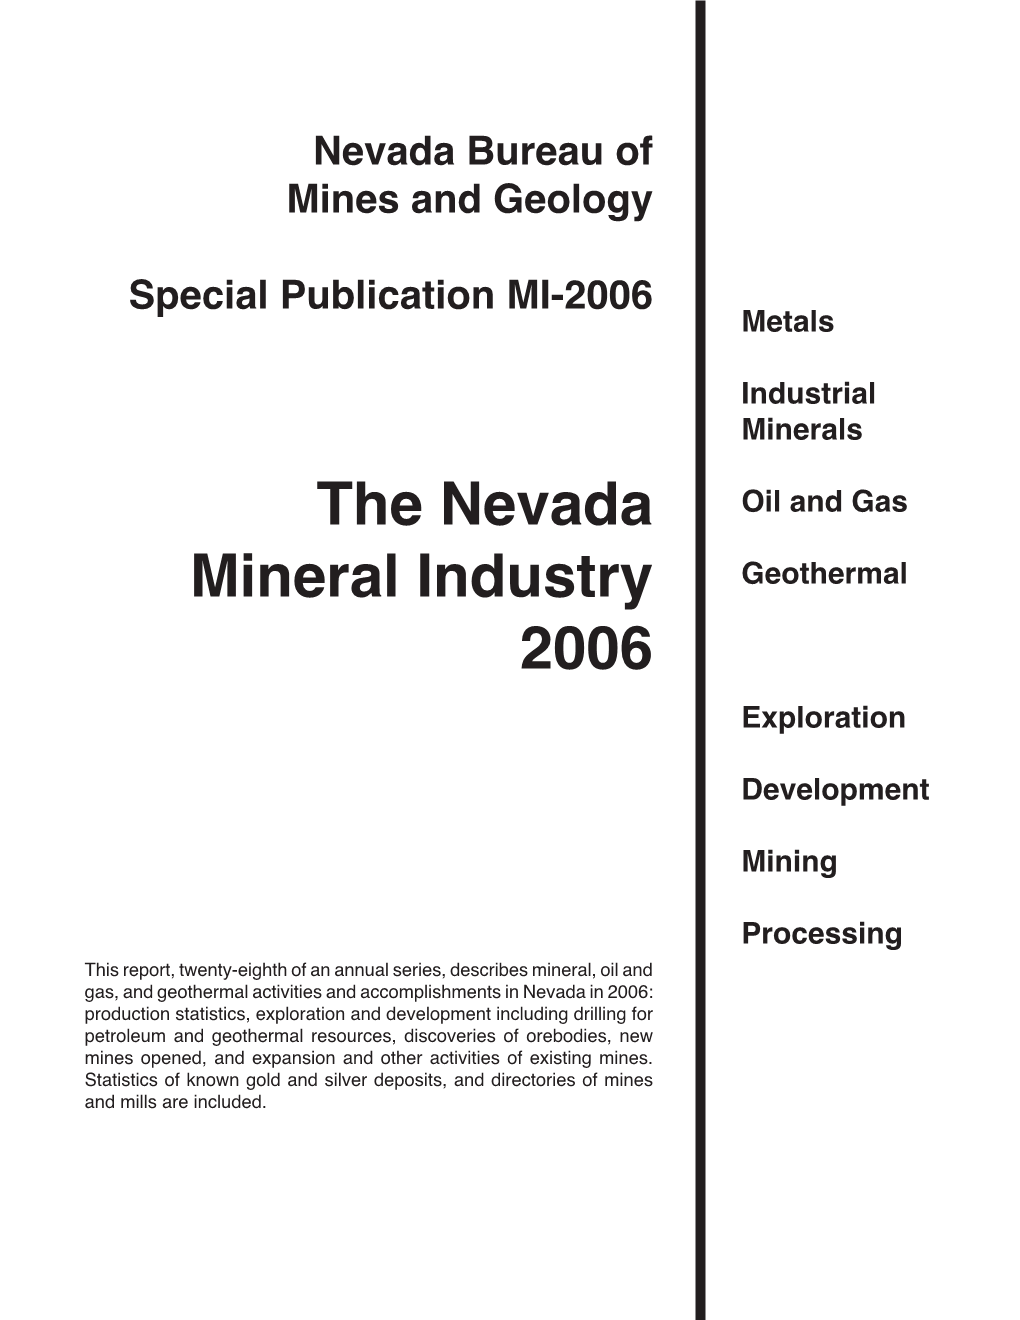 The Nevada Mineral Industry 2006